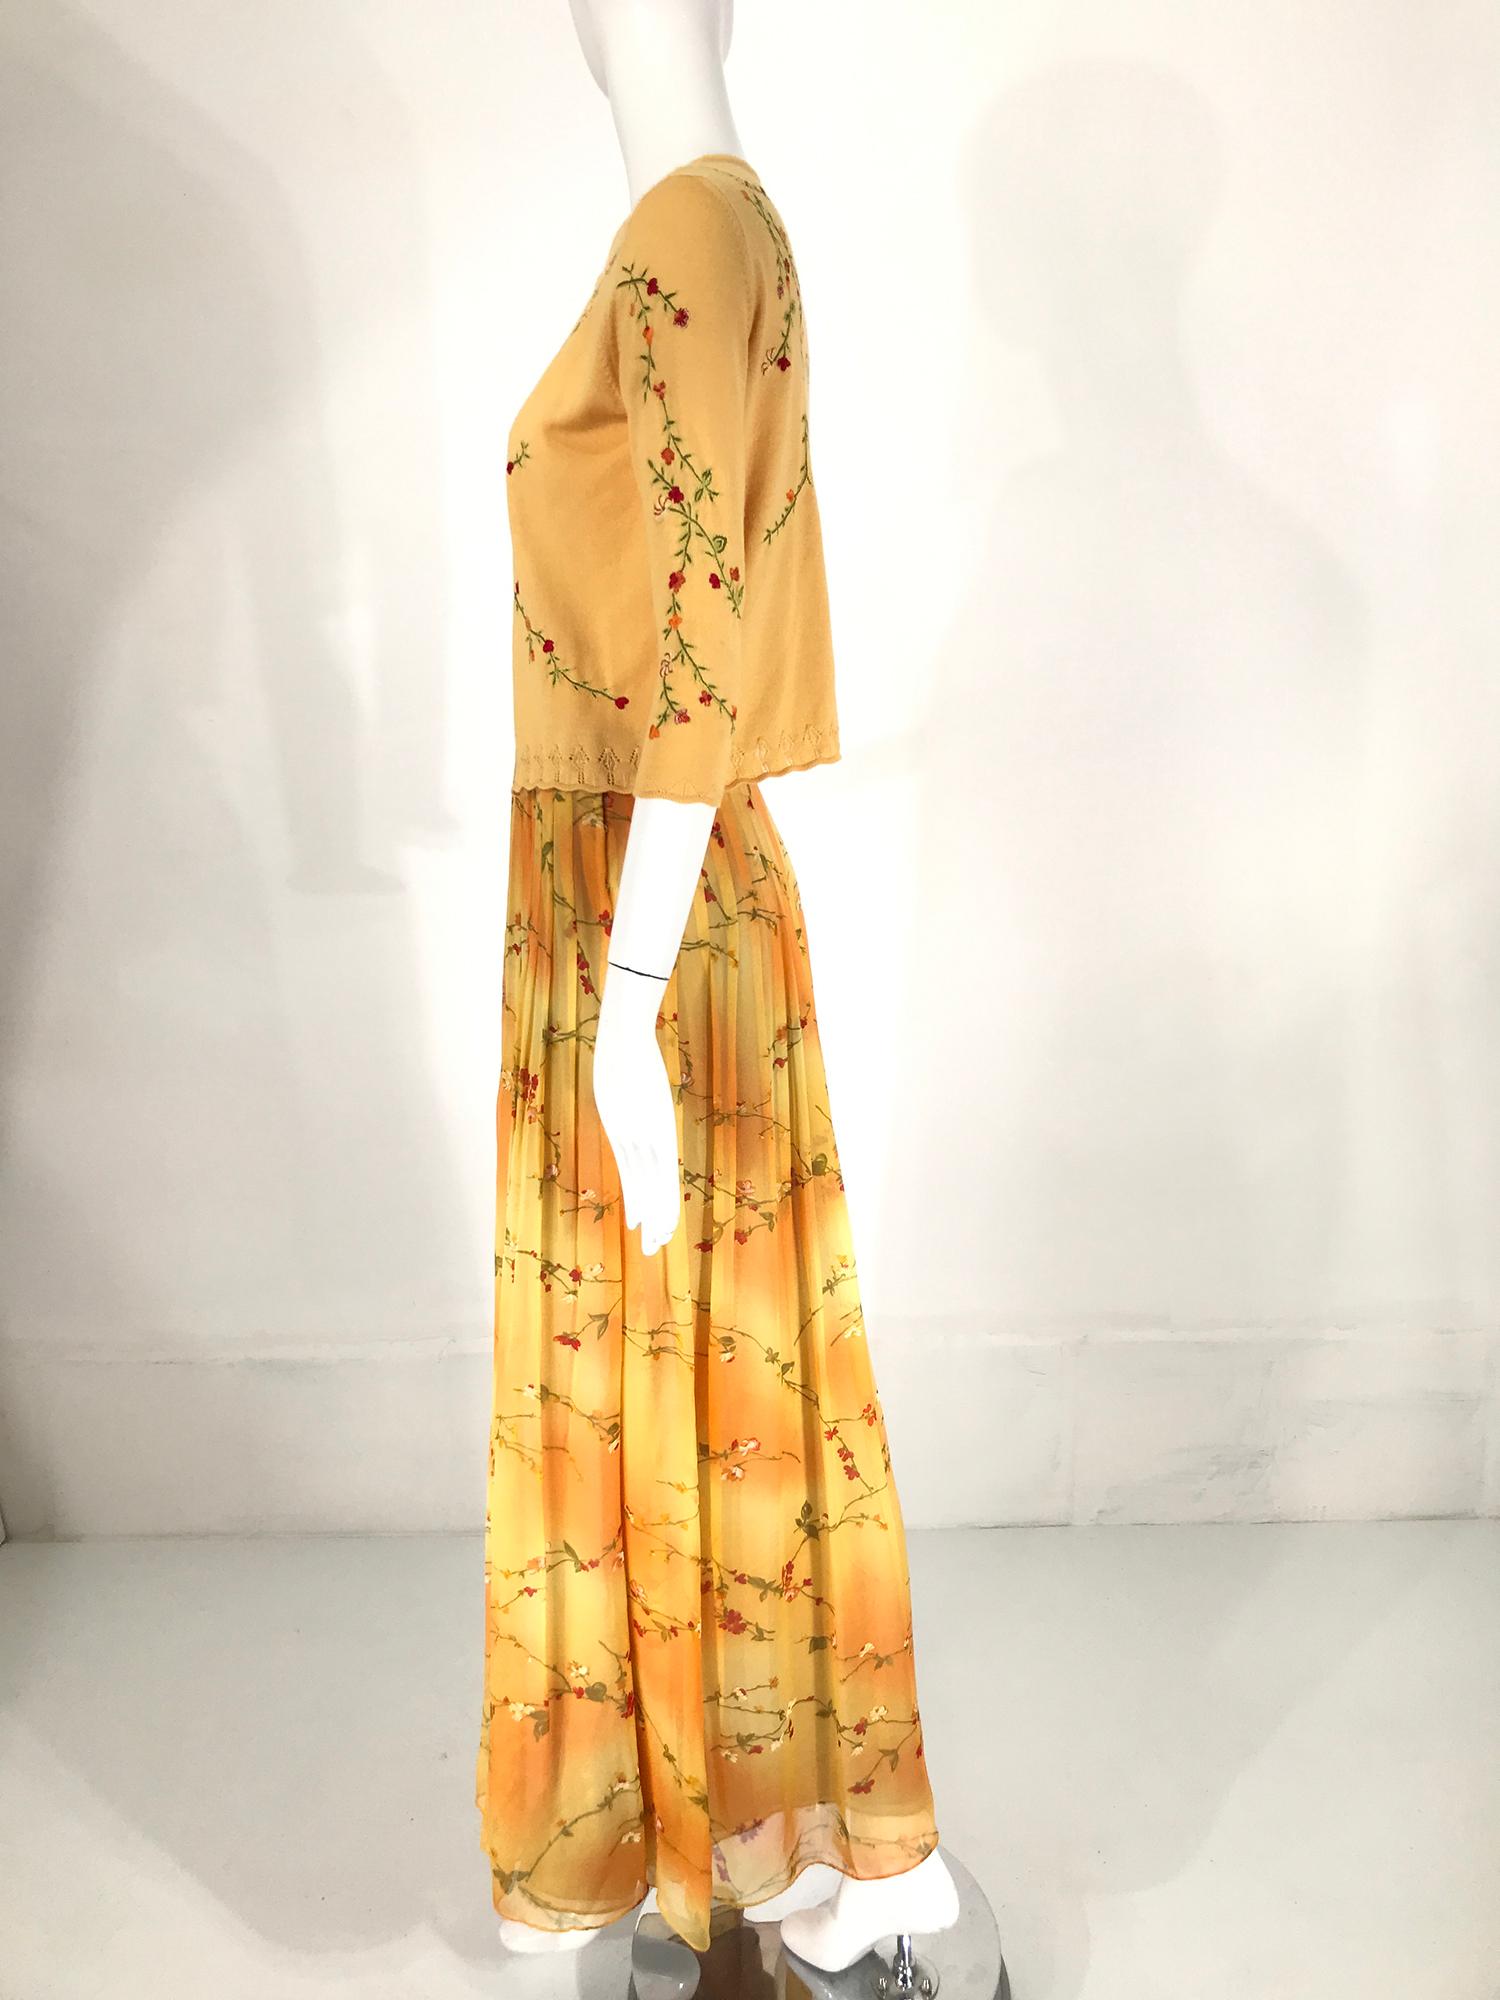 Oscar de la Renta 2pc Embroidered Cashmere Sweater & Printed Silk Maxi Skirt  In Good Condition For Sale In West Palm Beach, FL